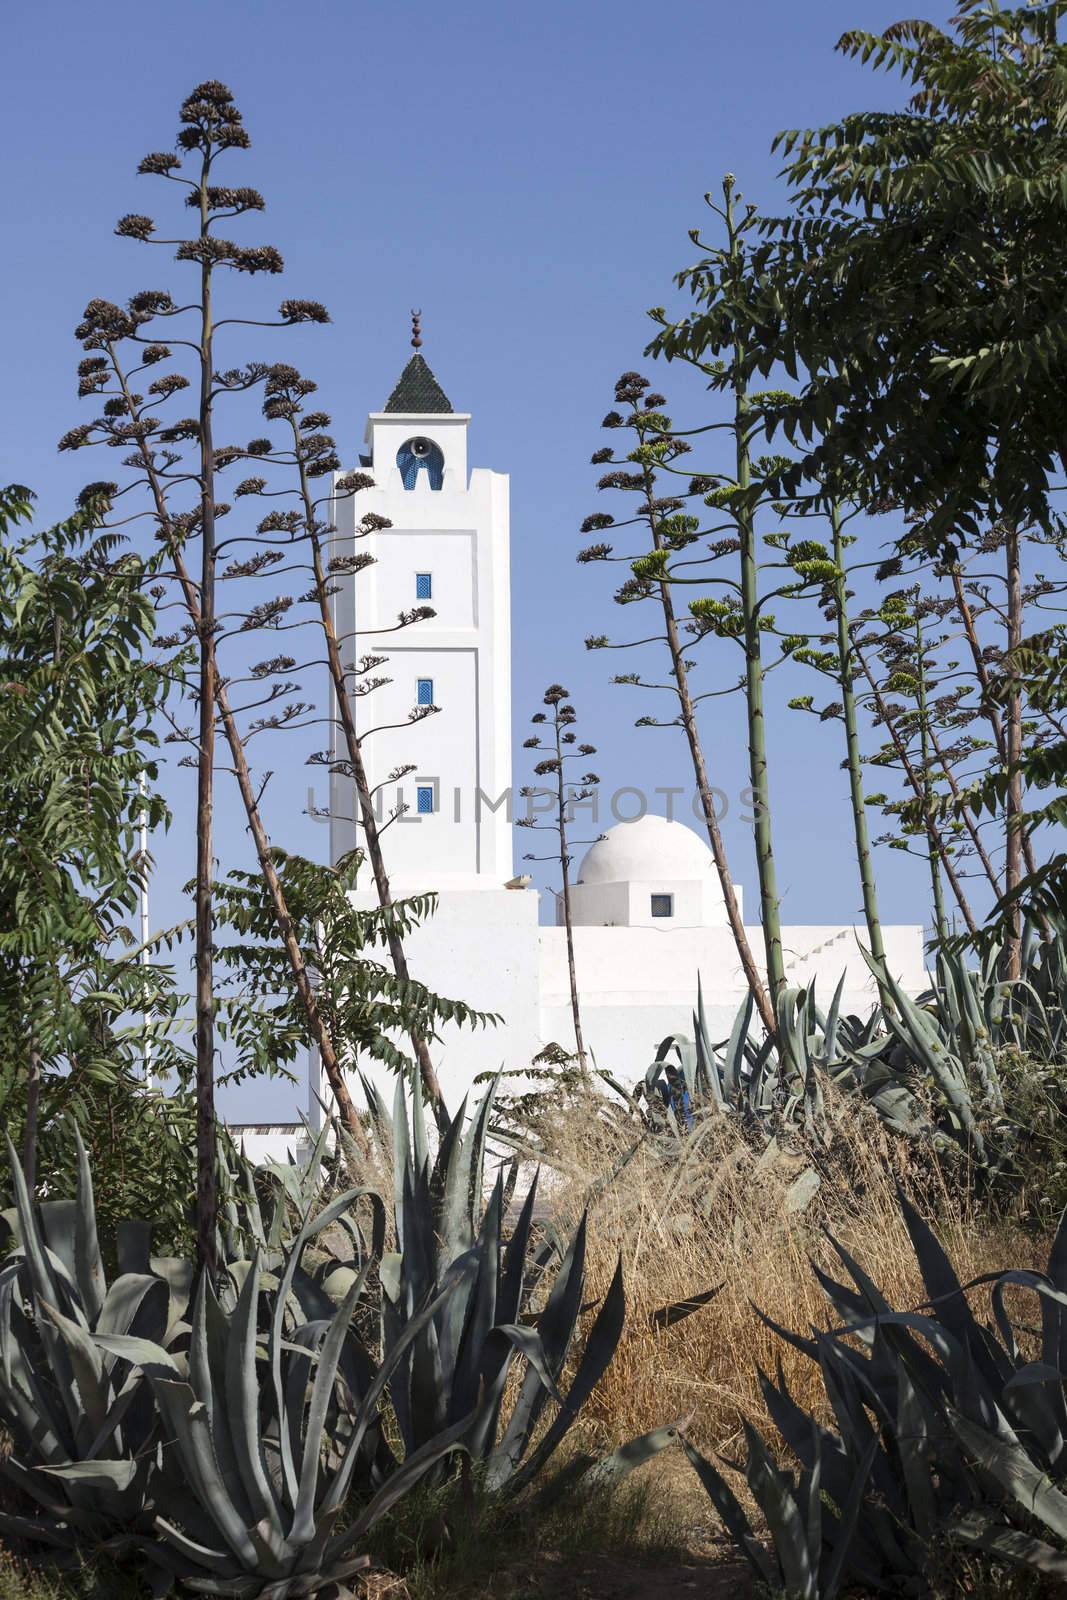 Minaret of Sidi Bou Said Mosque in local traditional colours. Photo taken in suburb of Tunis - capital city of Tunisia